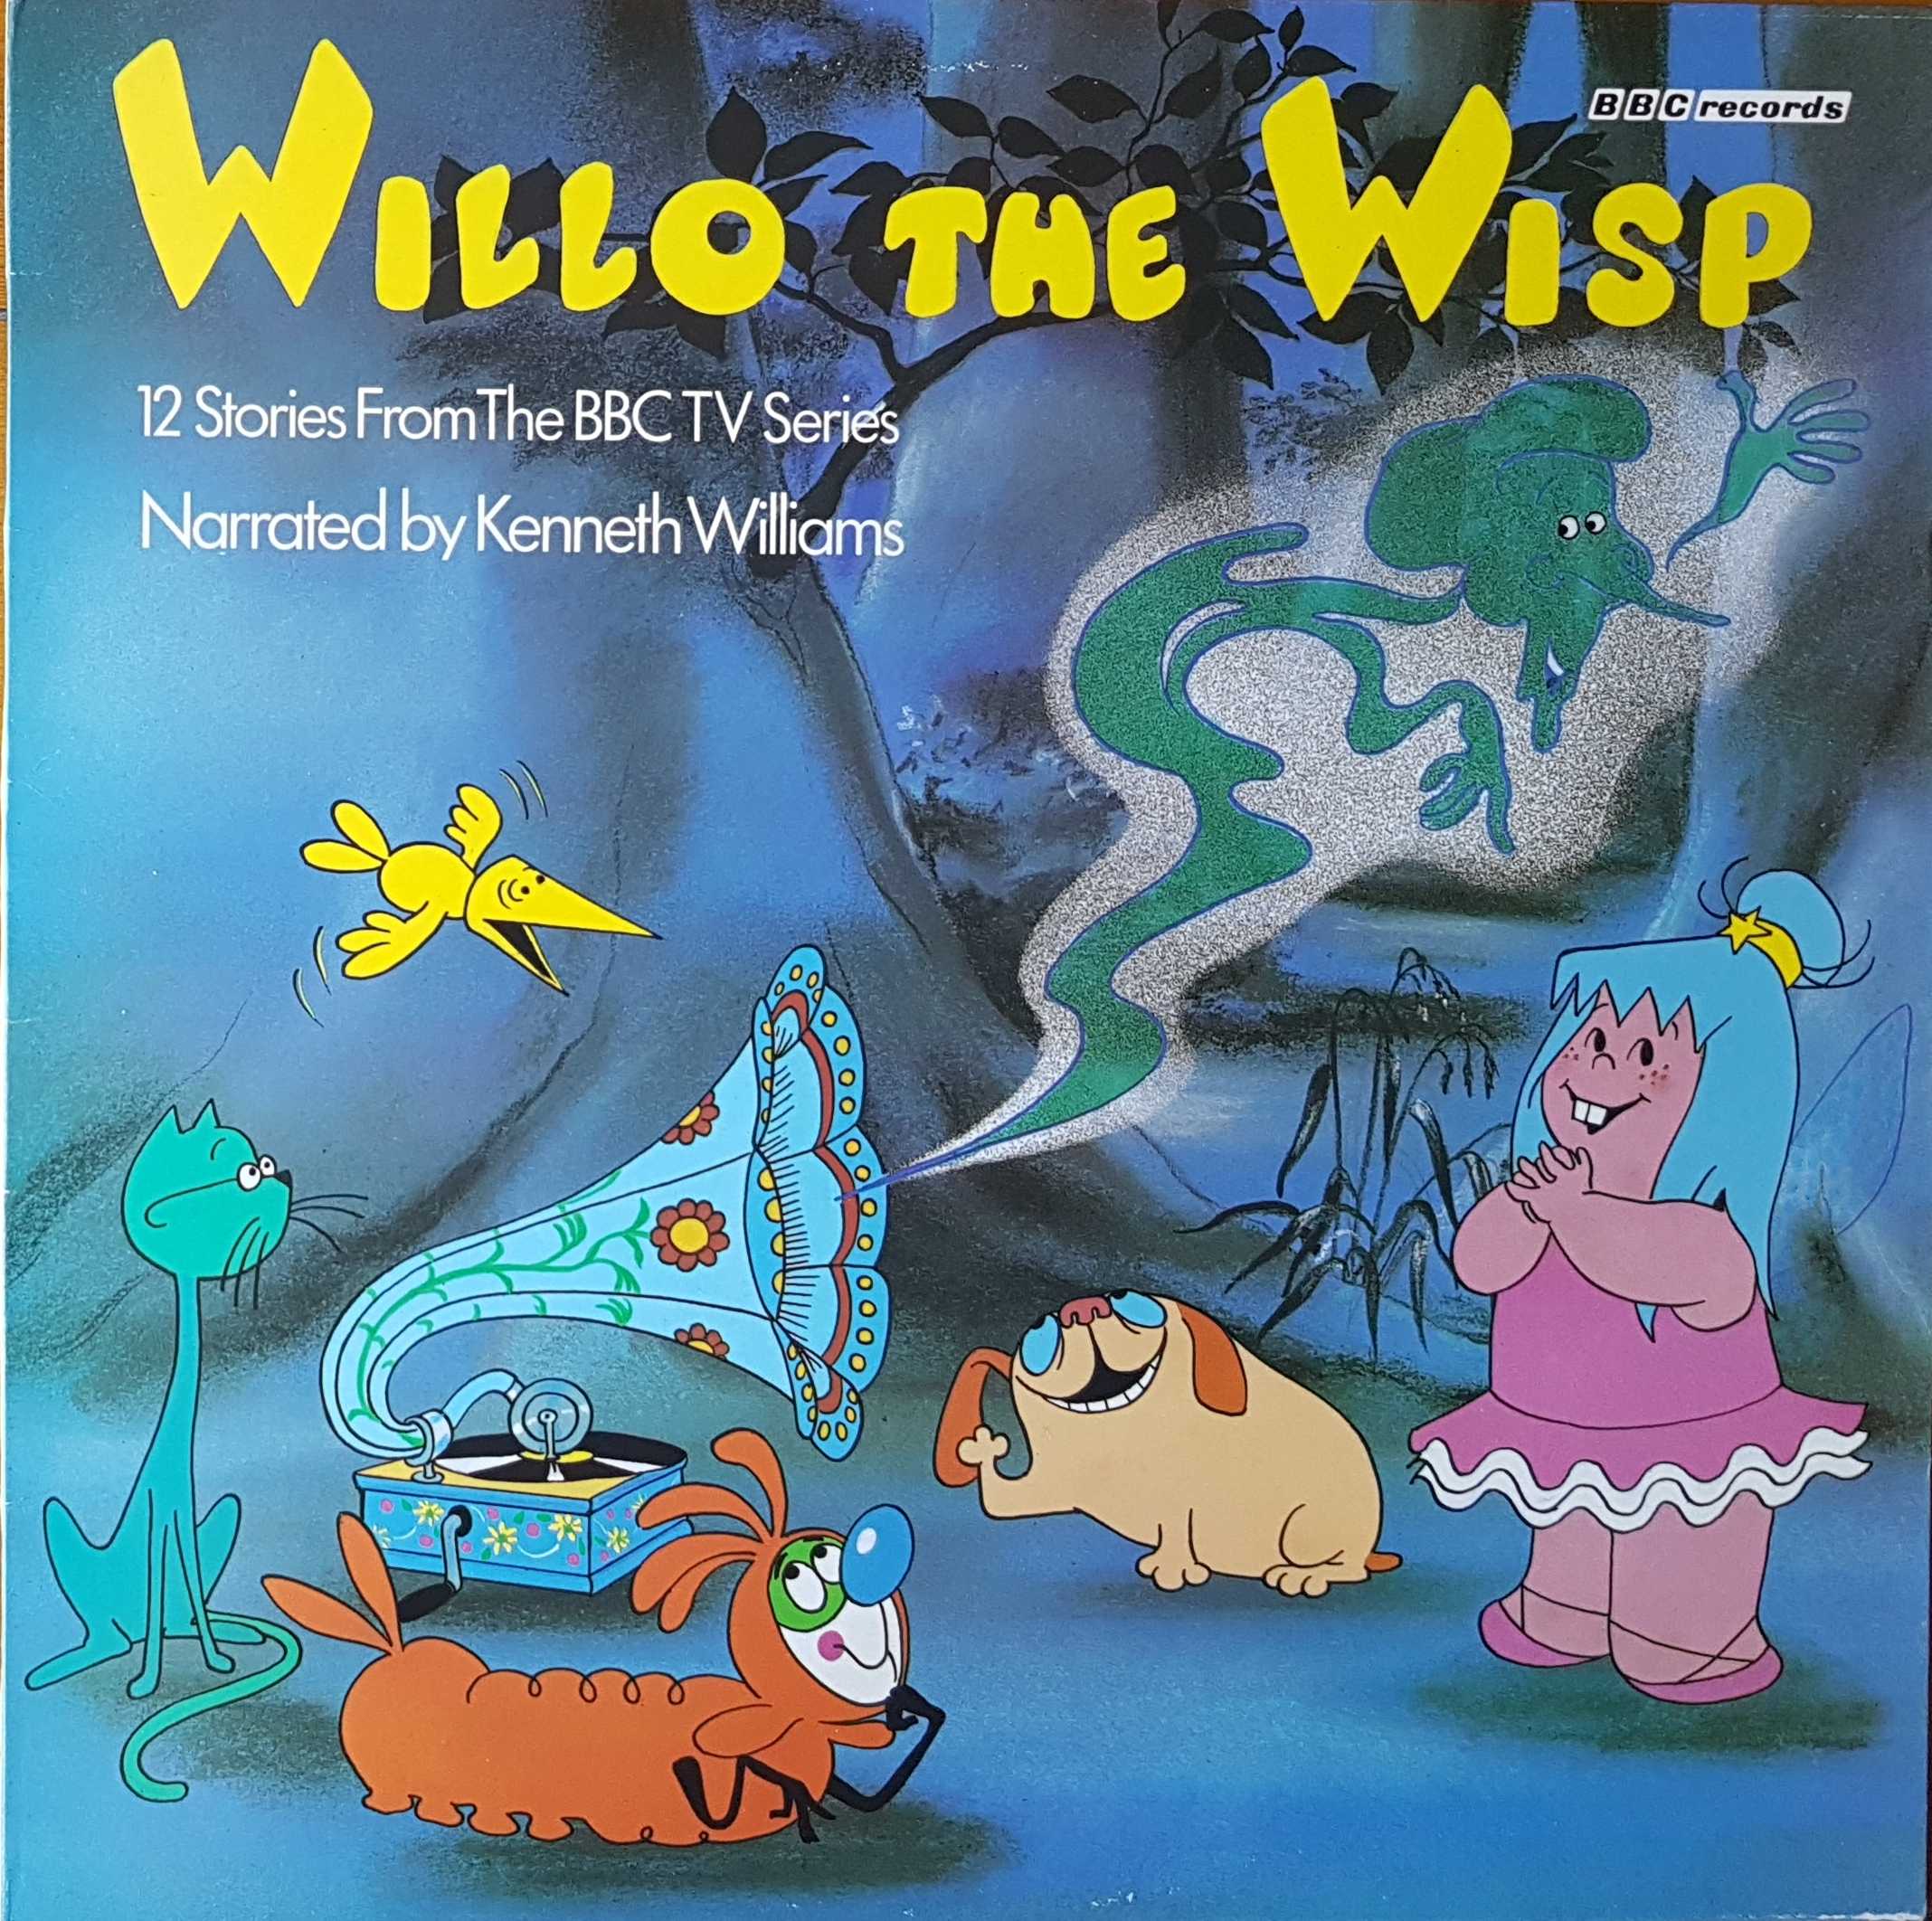 Picture of REC 427 Willo the wisp by artist Nicholas Spargo / Kenneth Williams